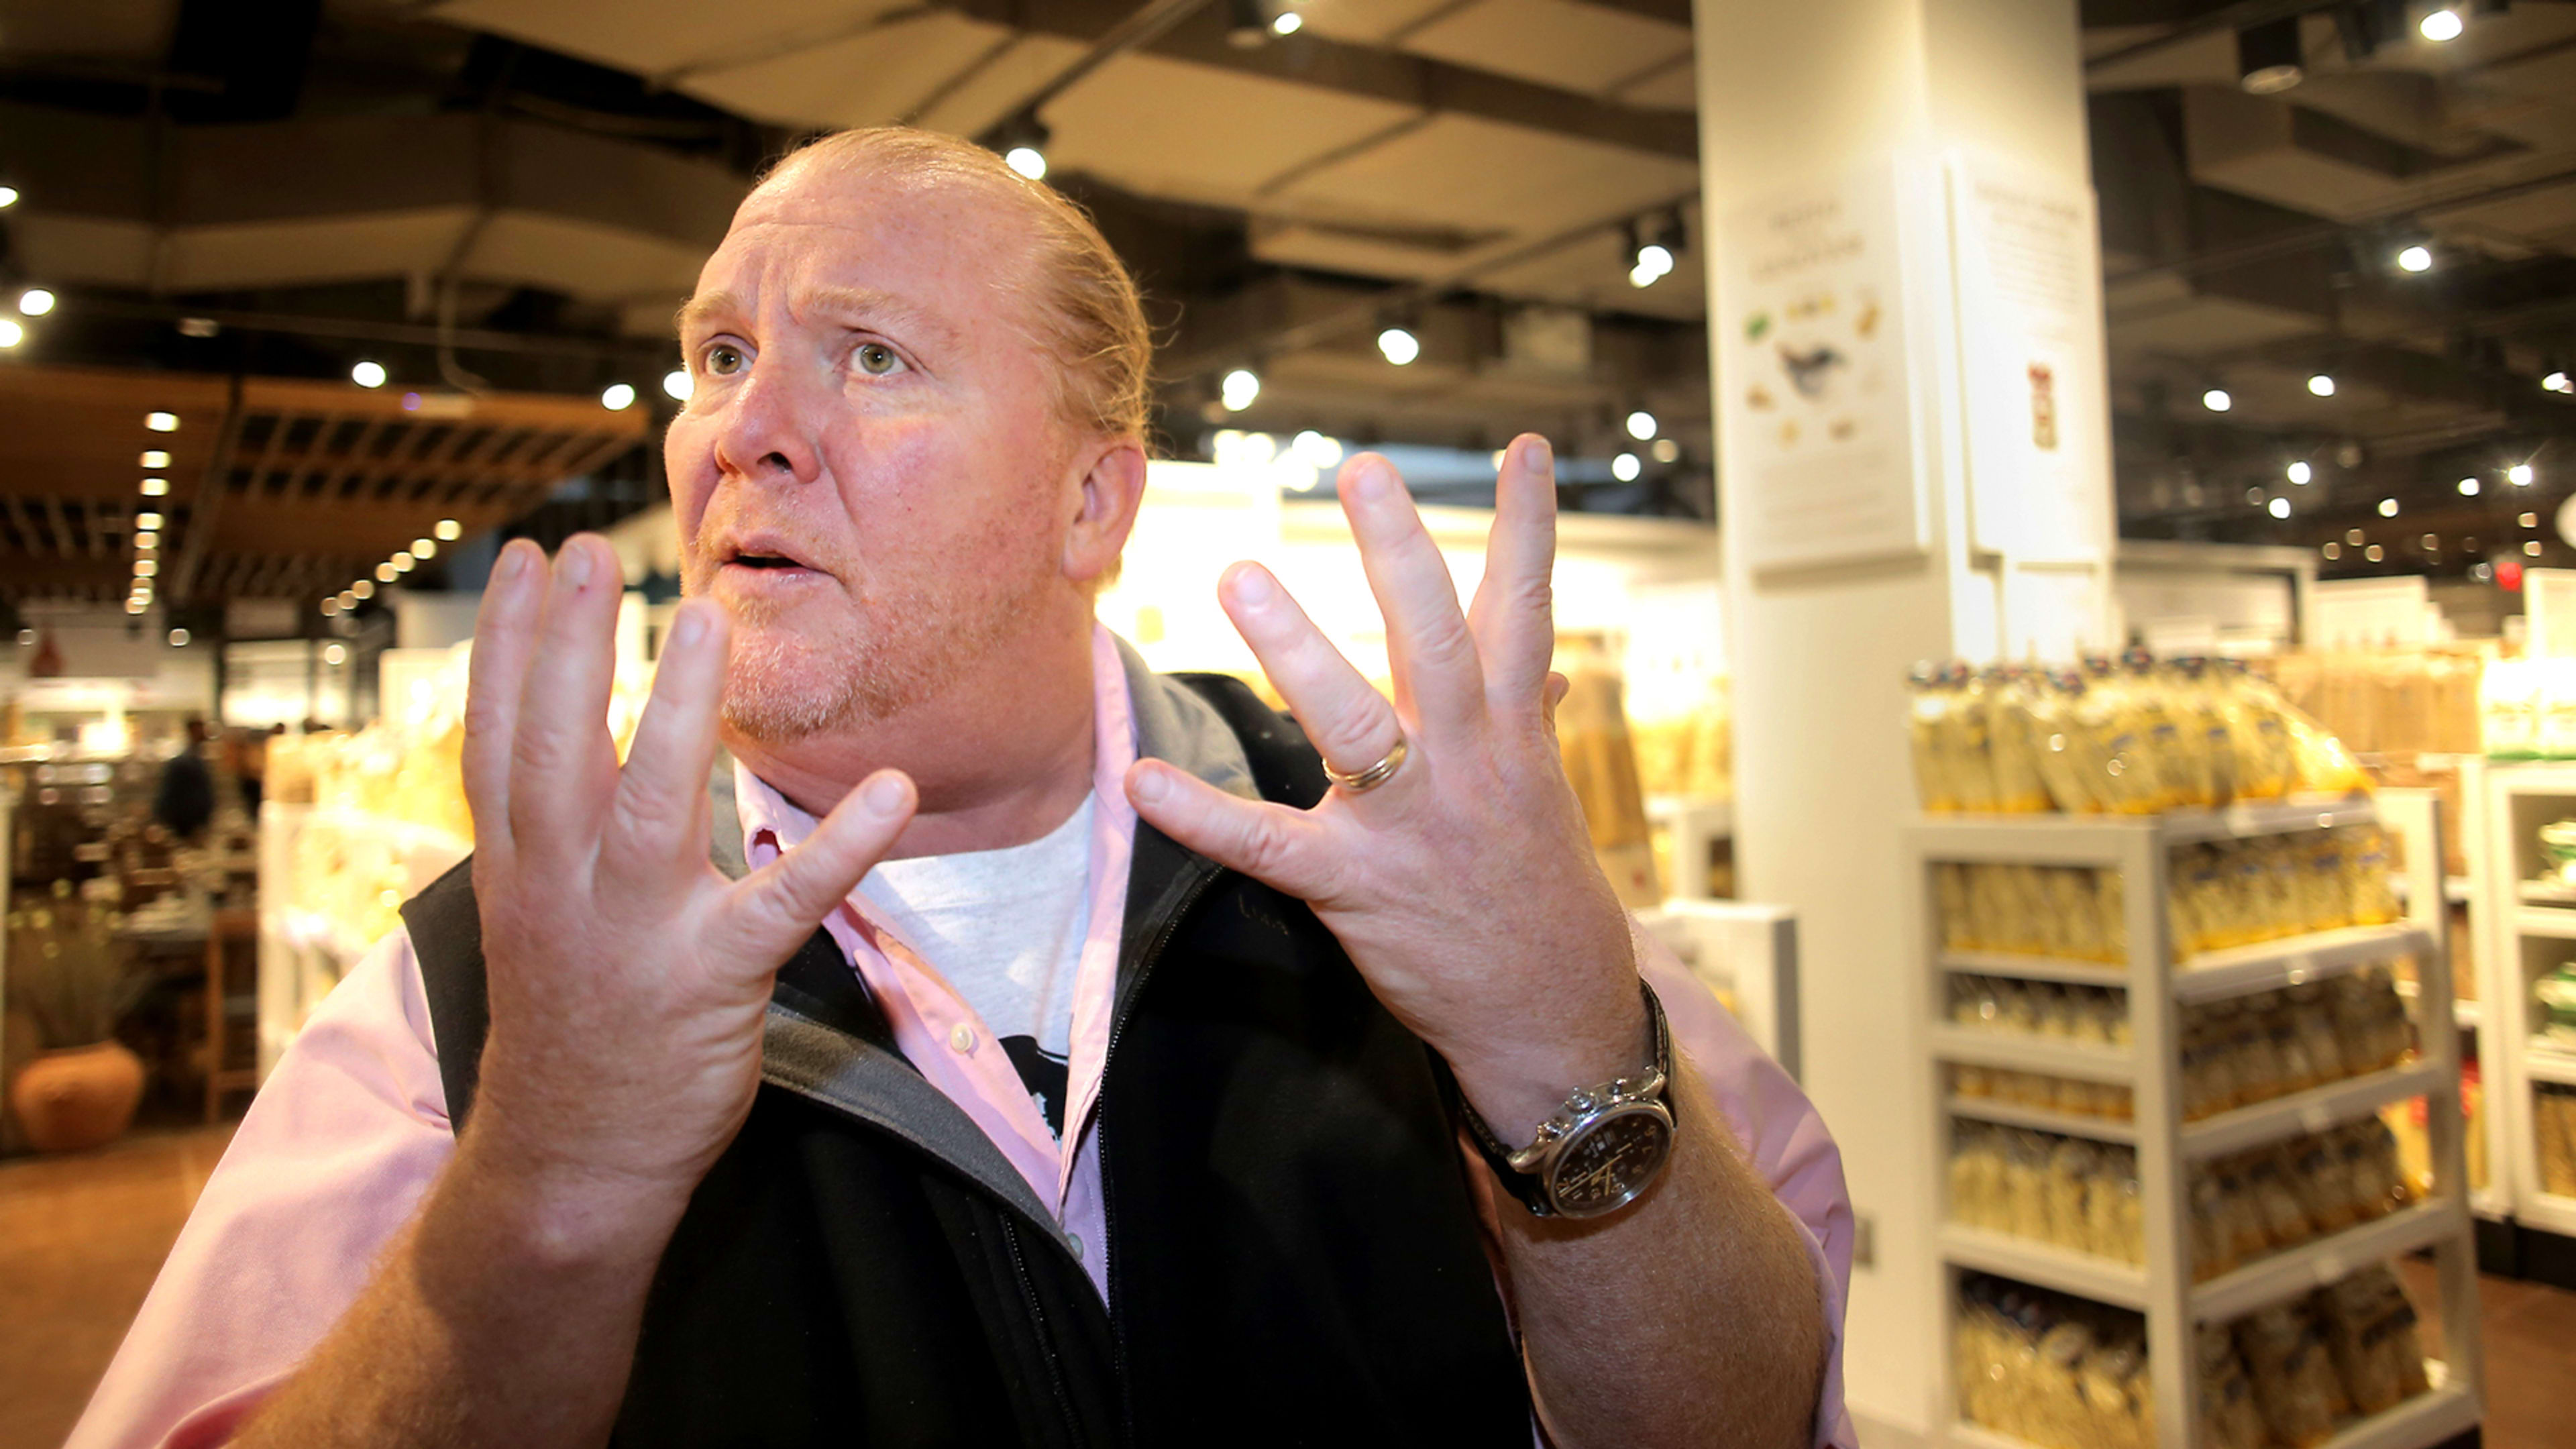 Mario Batali, six weeks ago: “the reckoning is coming across the board”